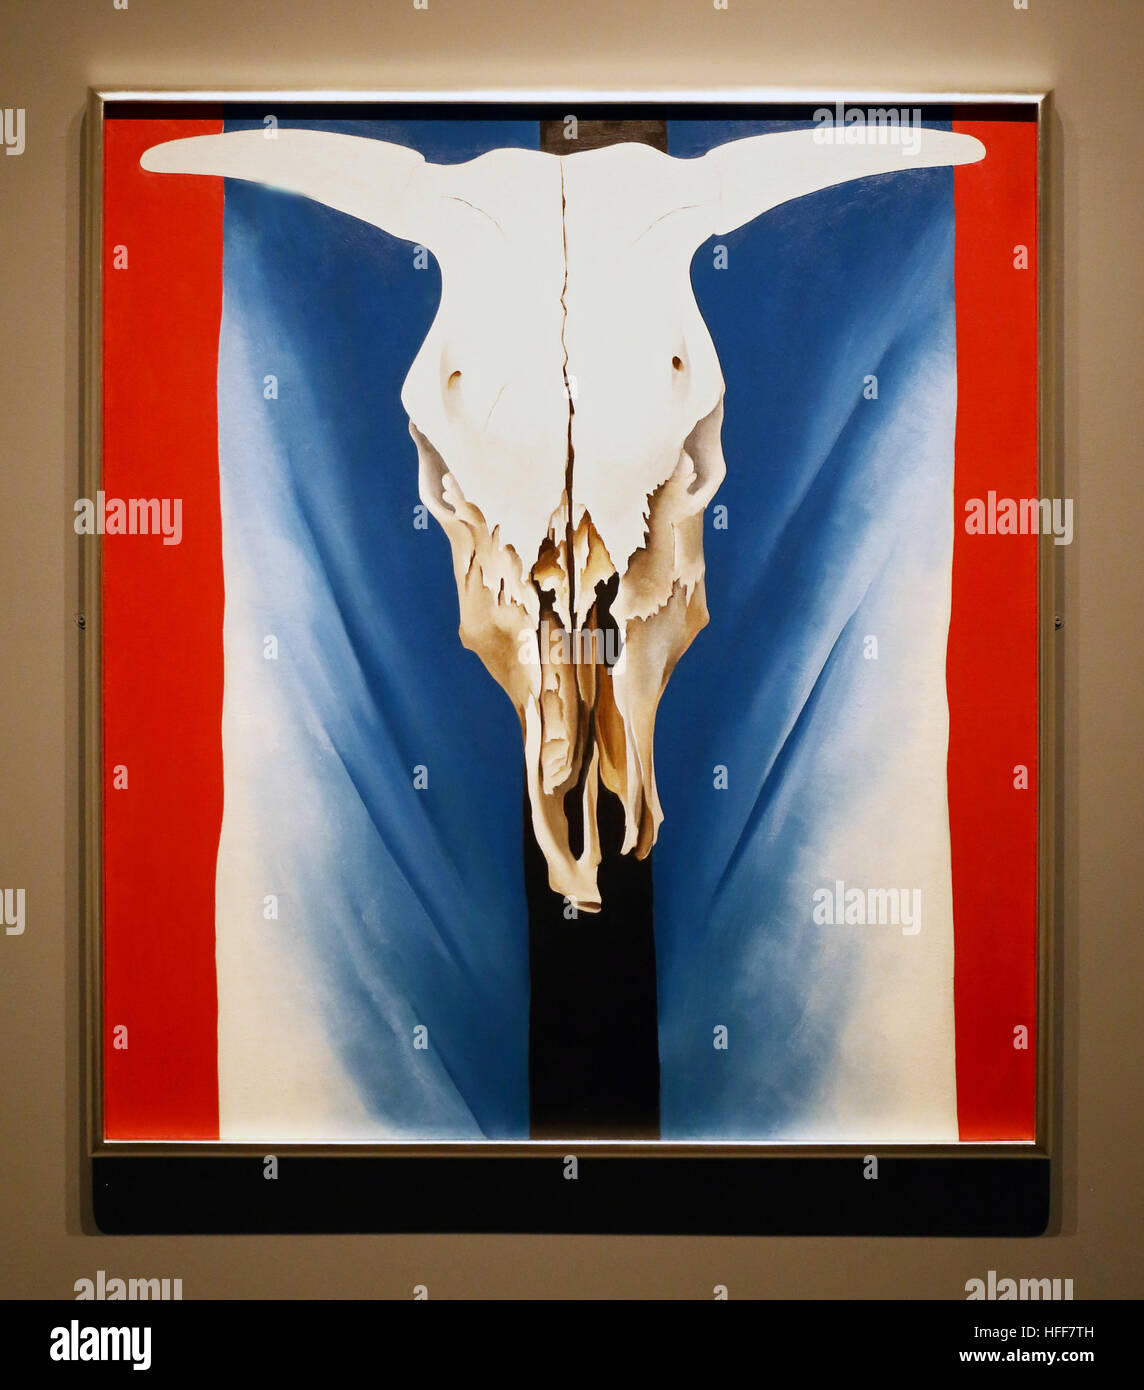 Oil painting of 'Cow's Skull: Red, White, and Blue'  by American artist Georgia O'Keeffe hanging at the Metropolitan Museum of Art in New York City. Stock Photo